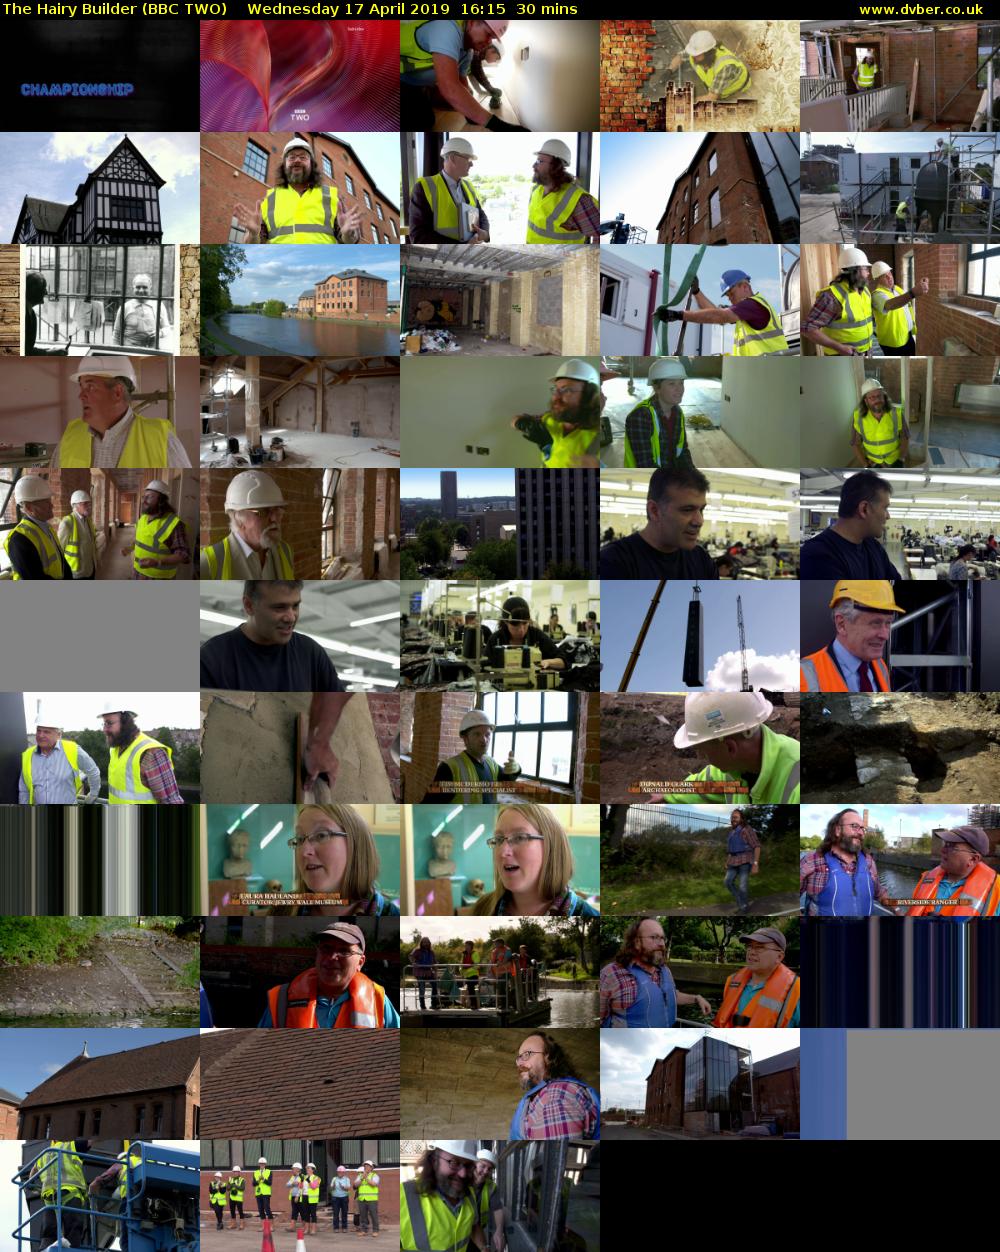 The Hairy Builder (BBC TWO) Wednesday 17 April 2019 16:15 - 16:45